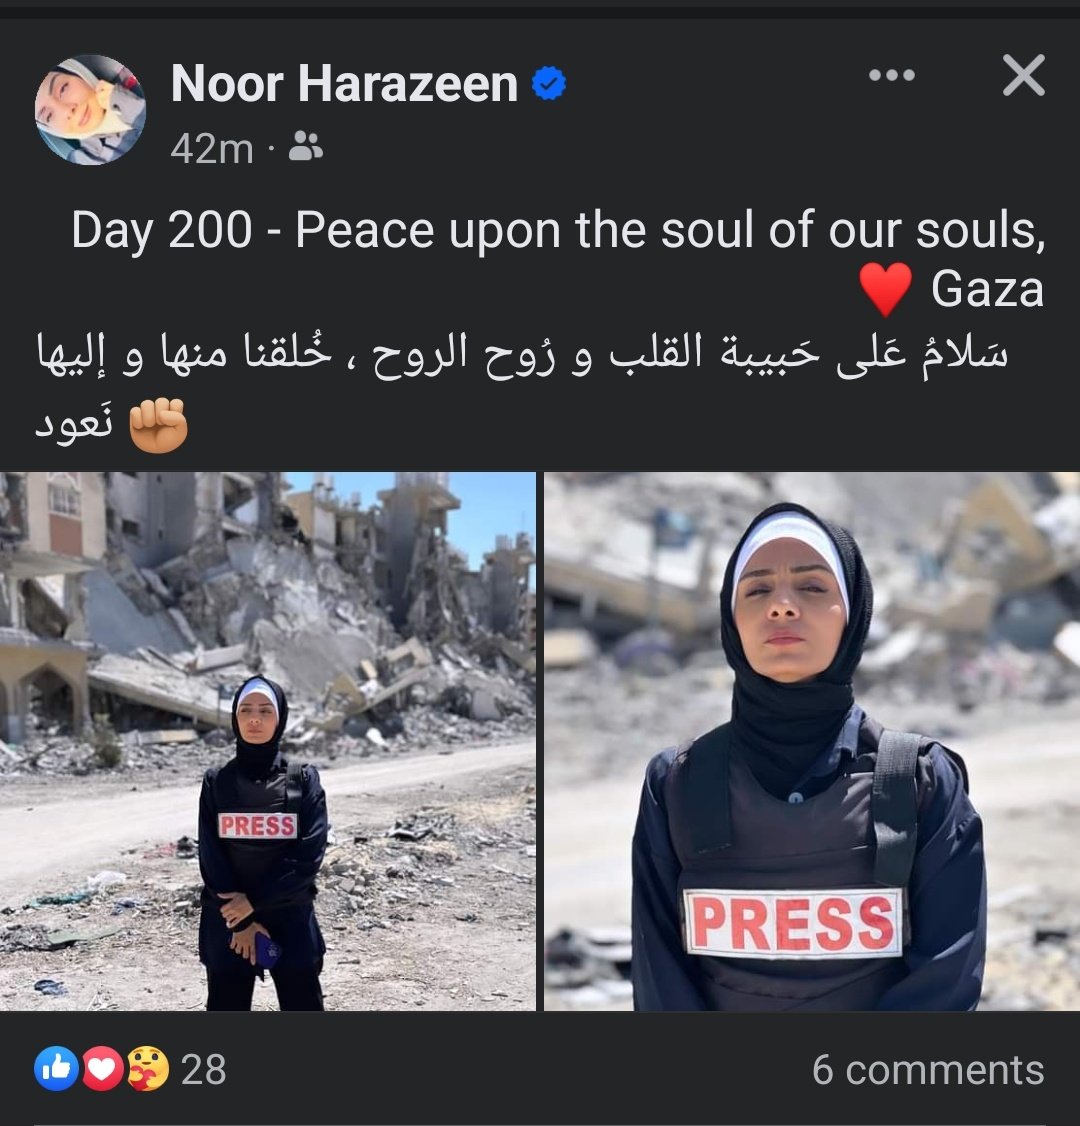 Find NOOR on Facebook. Follow HER. Support HER. She is an inspiration..a Hero...a true Palestinian woman, mother and journalist whom we hold sacred to our hearts and minds. الله ما عالي سماه يحميها ويحمي عيلتها❤️